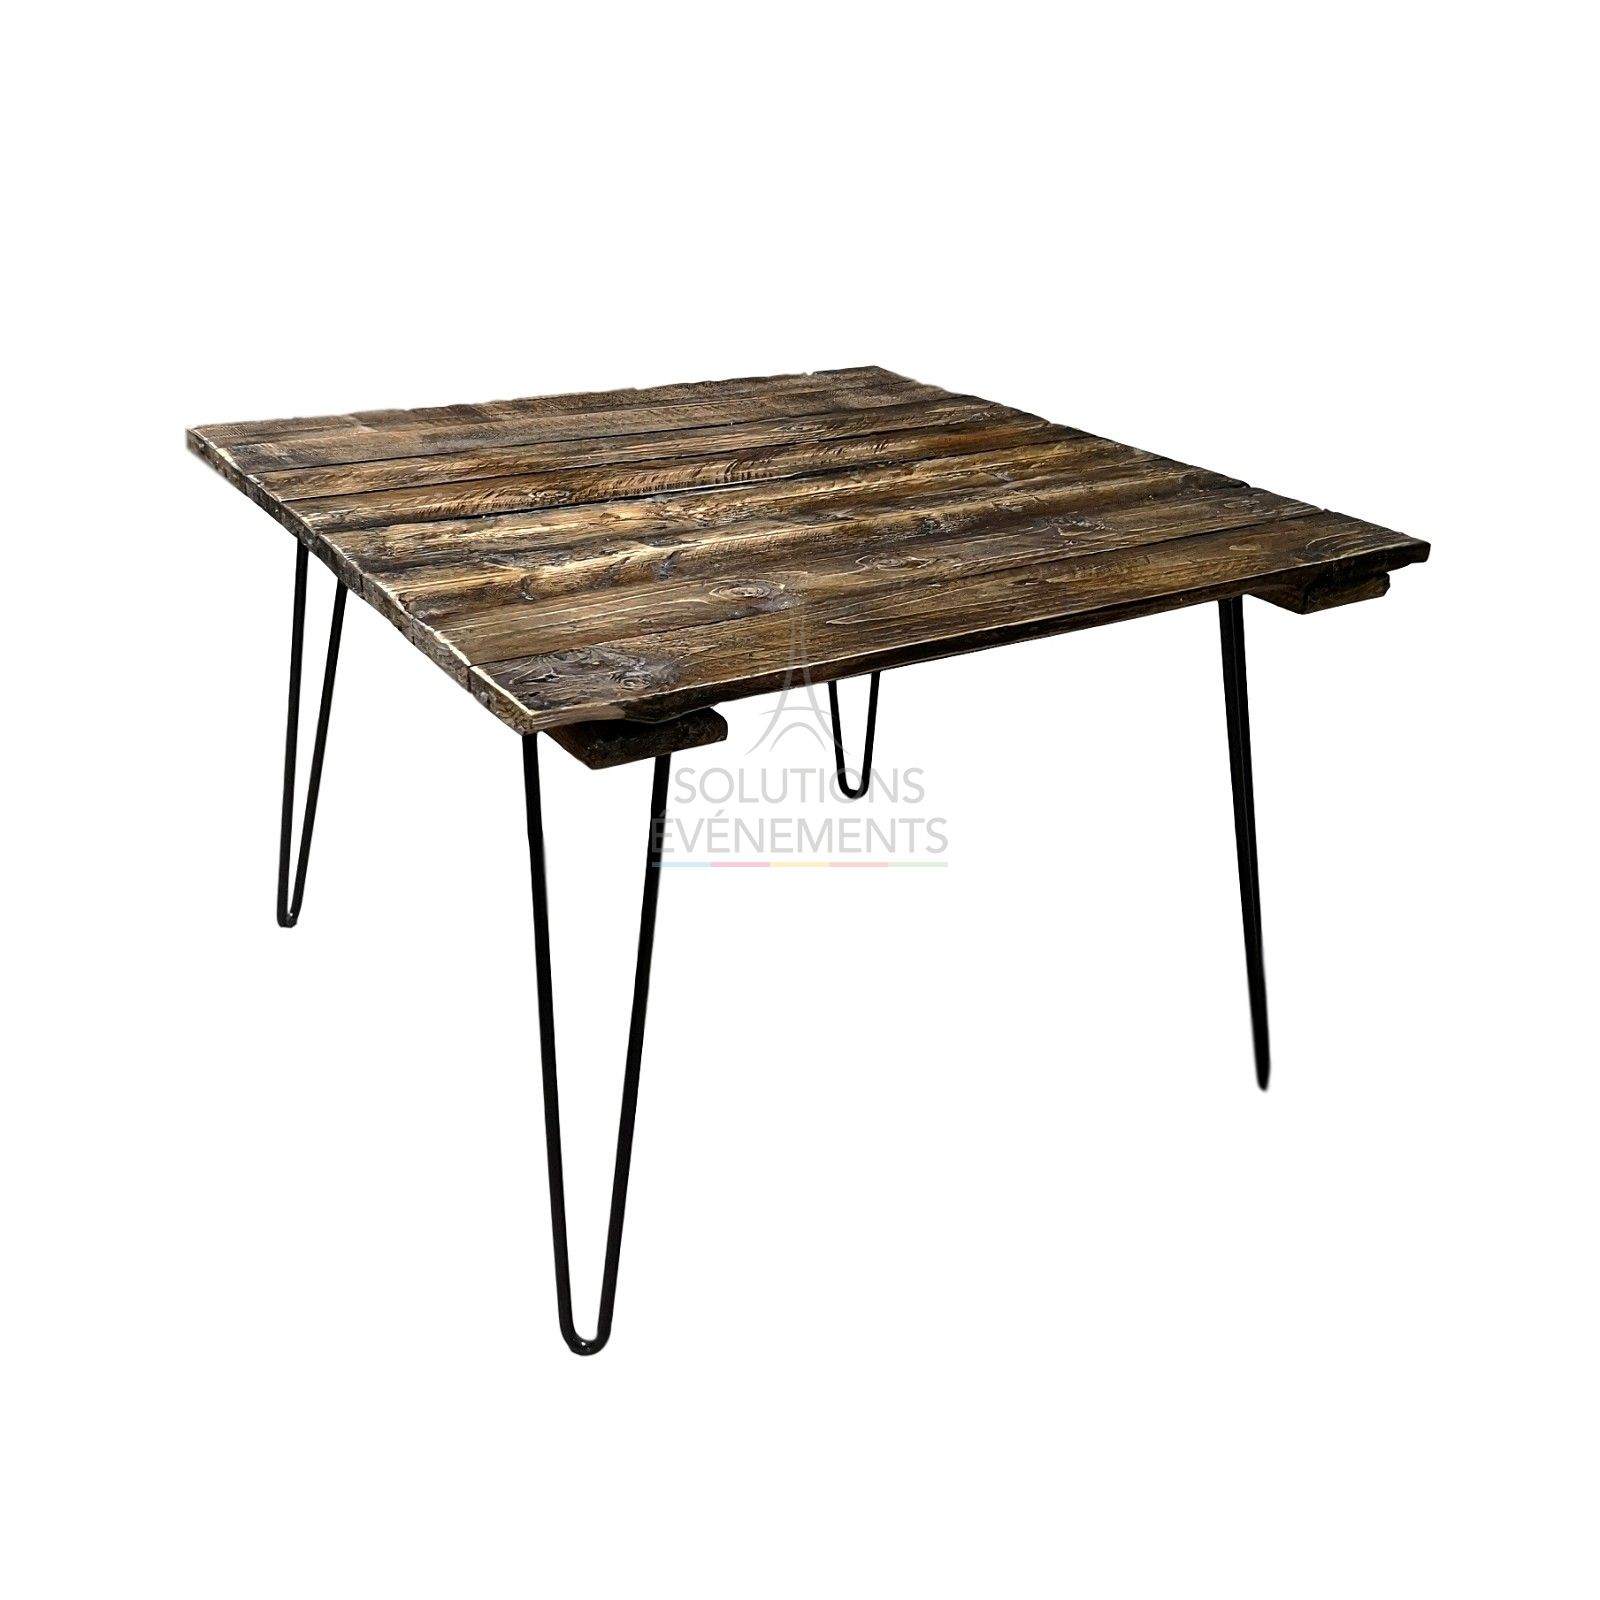 Rental of vintage and industrial design coffee table